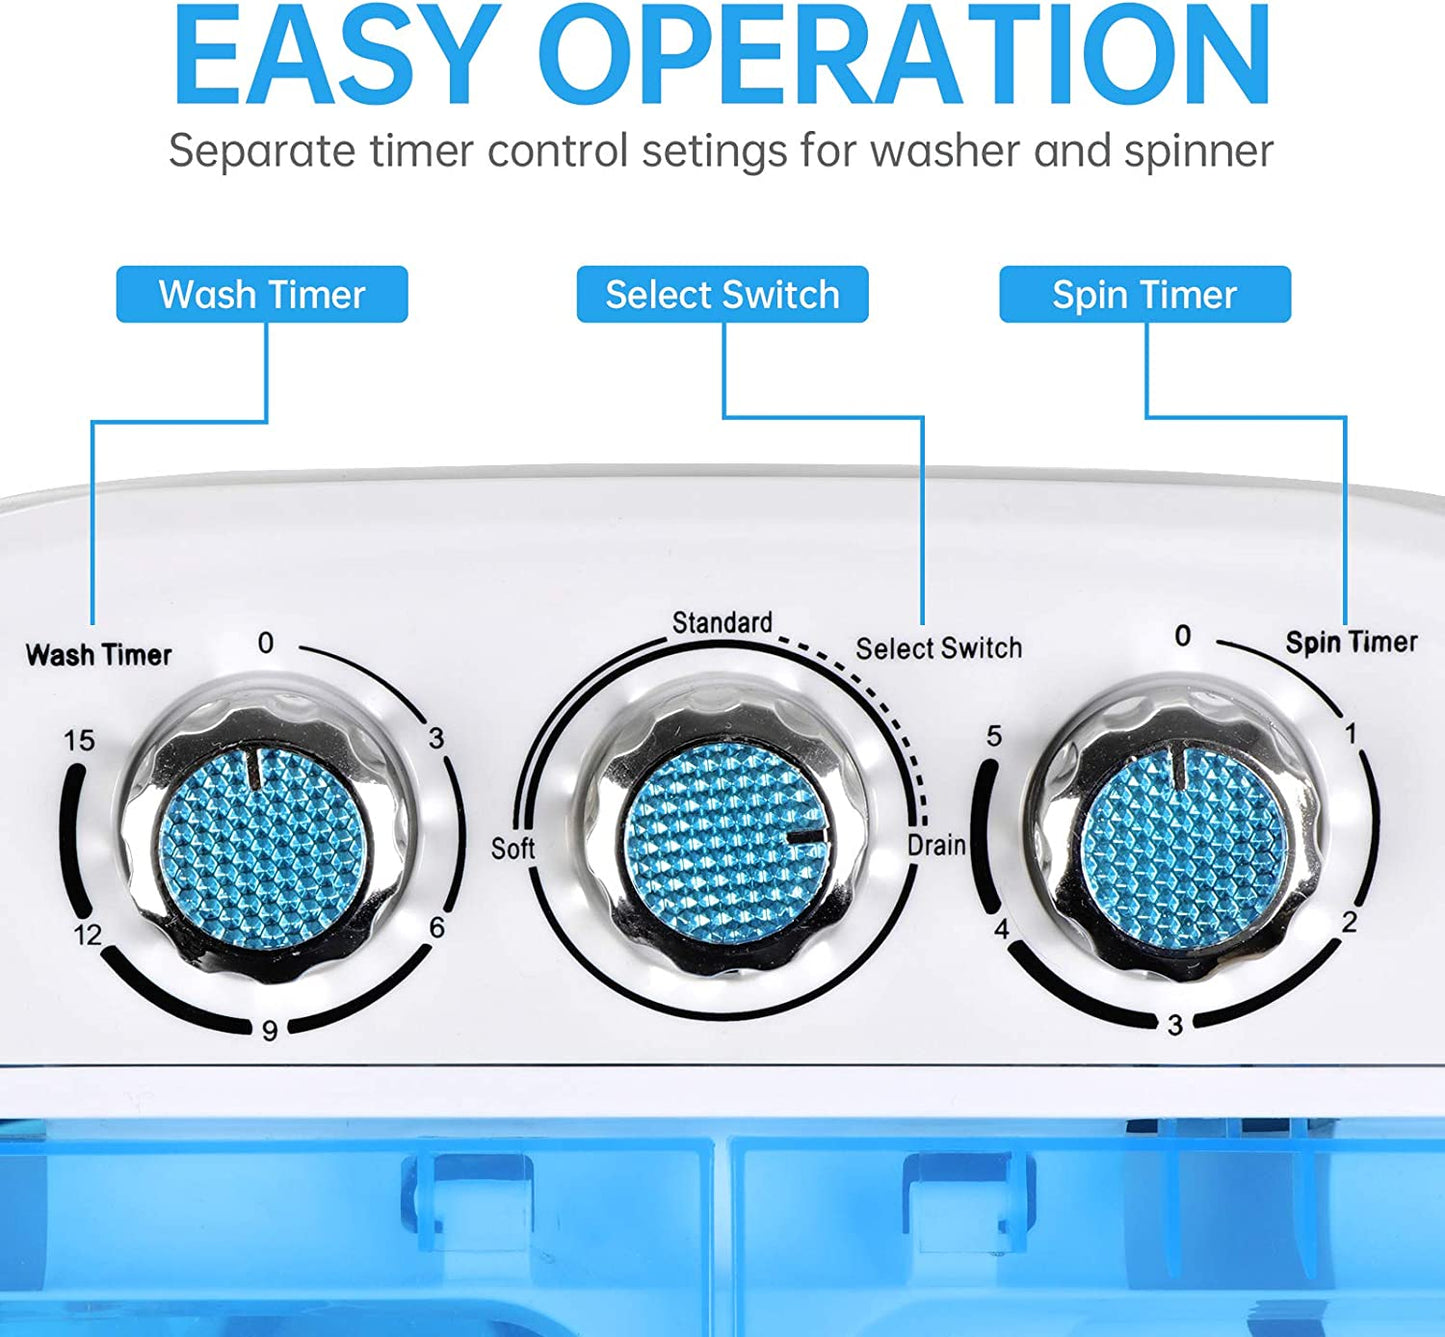 Portable Clothes Washing Machine Mini Twin Tub Small Laundry Washer Aparment Spin Dryer 9.9lbs Capacity Lightweight for Dormitory, RV